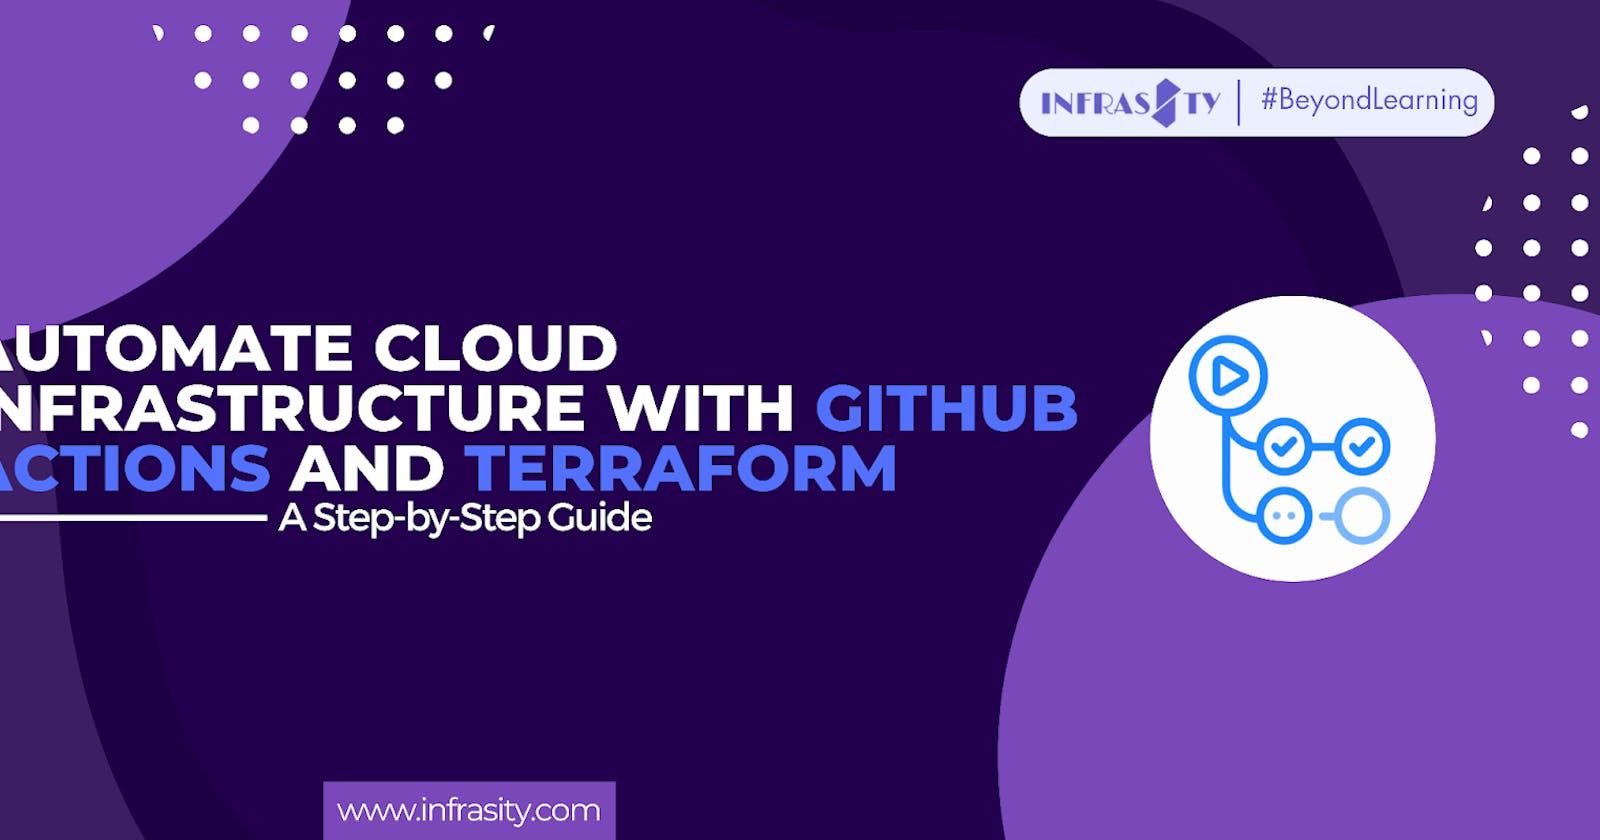 Automate Cloud Infrastructure with GitHub Actions and Terraform: A Step-by-Step Guide